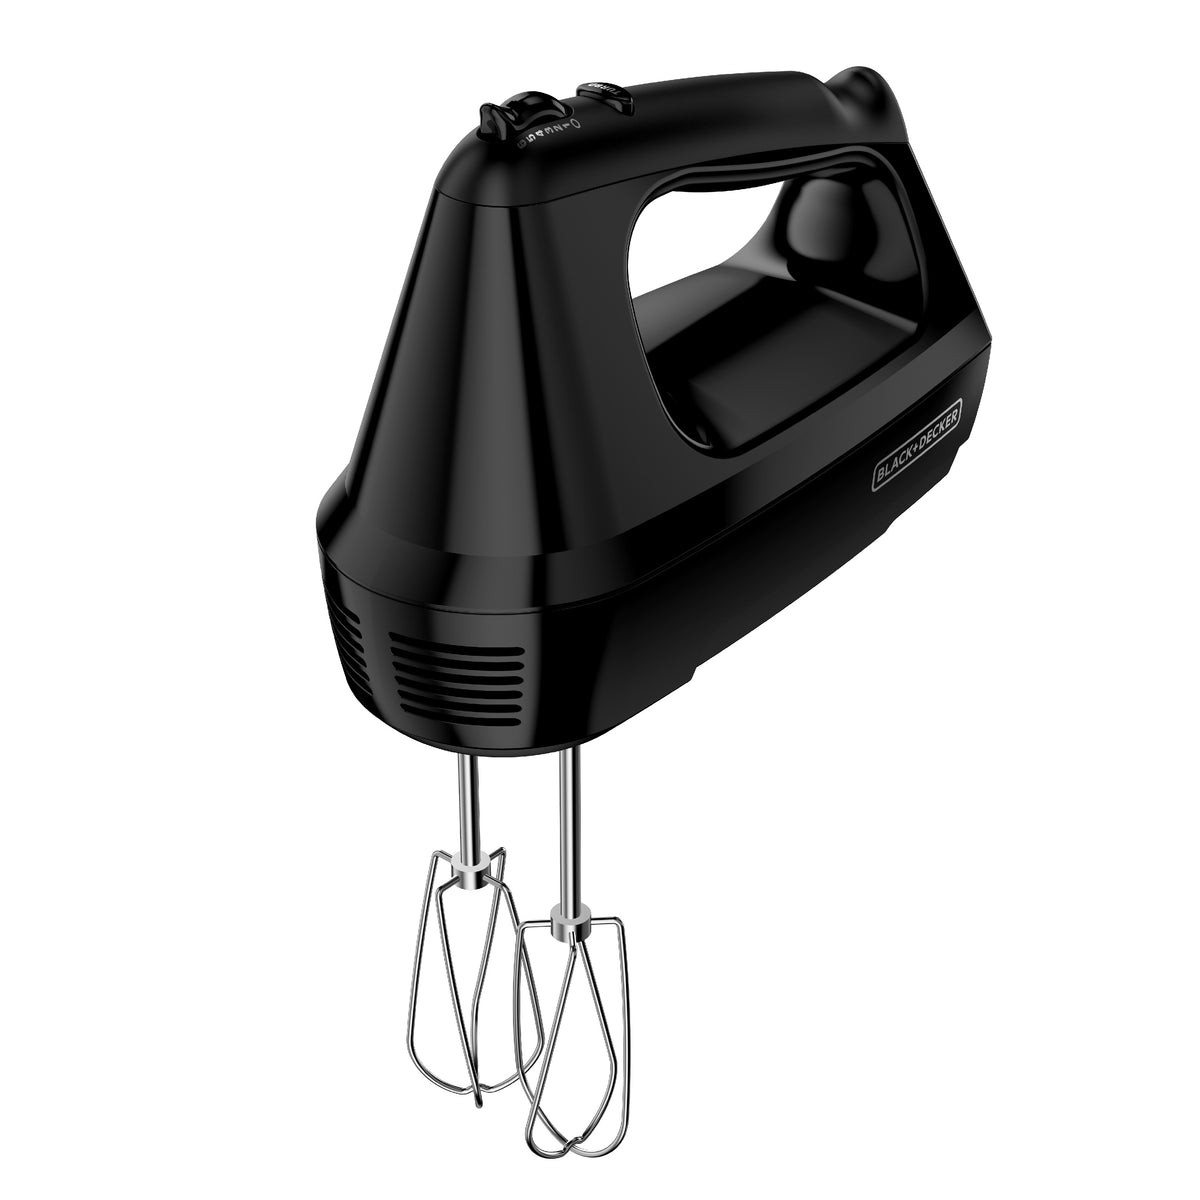 Oster Classic Hand Mixer with Super Aerator Whisk, Black